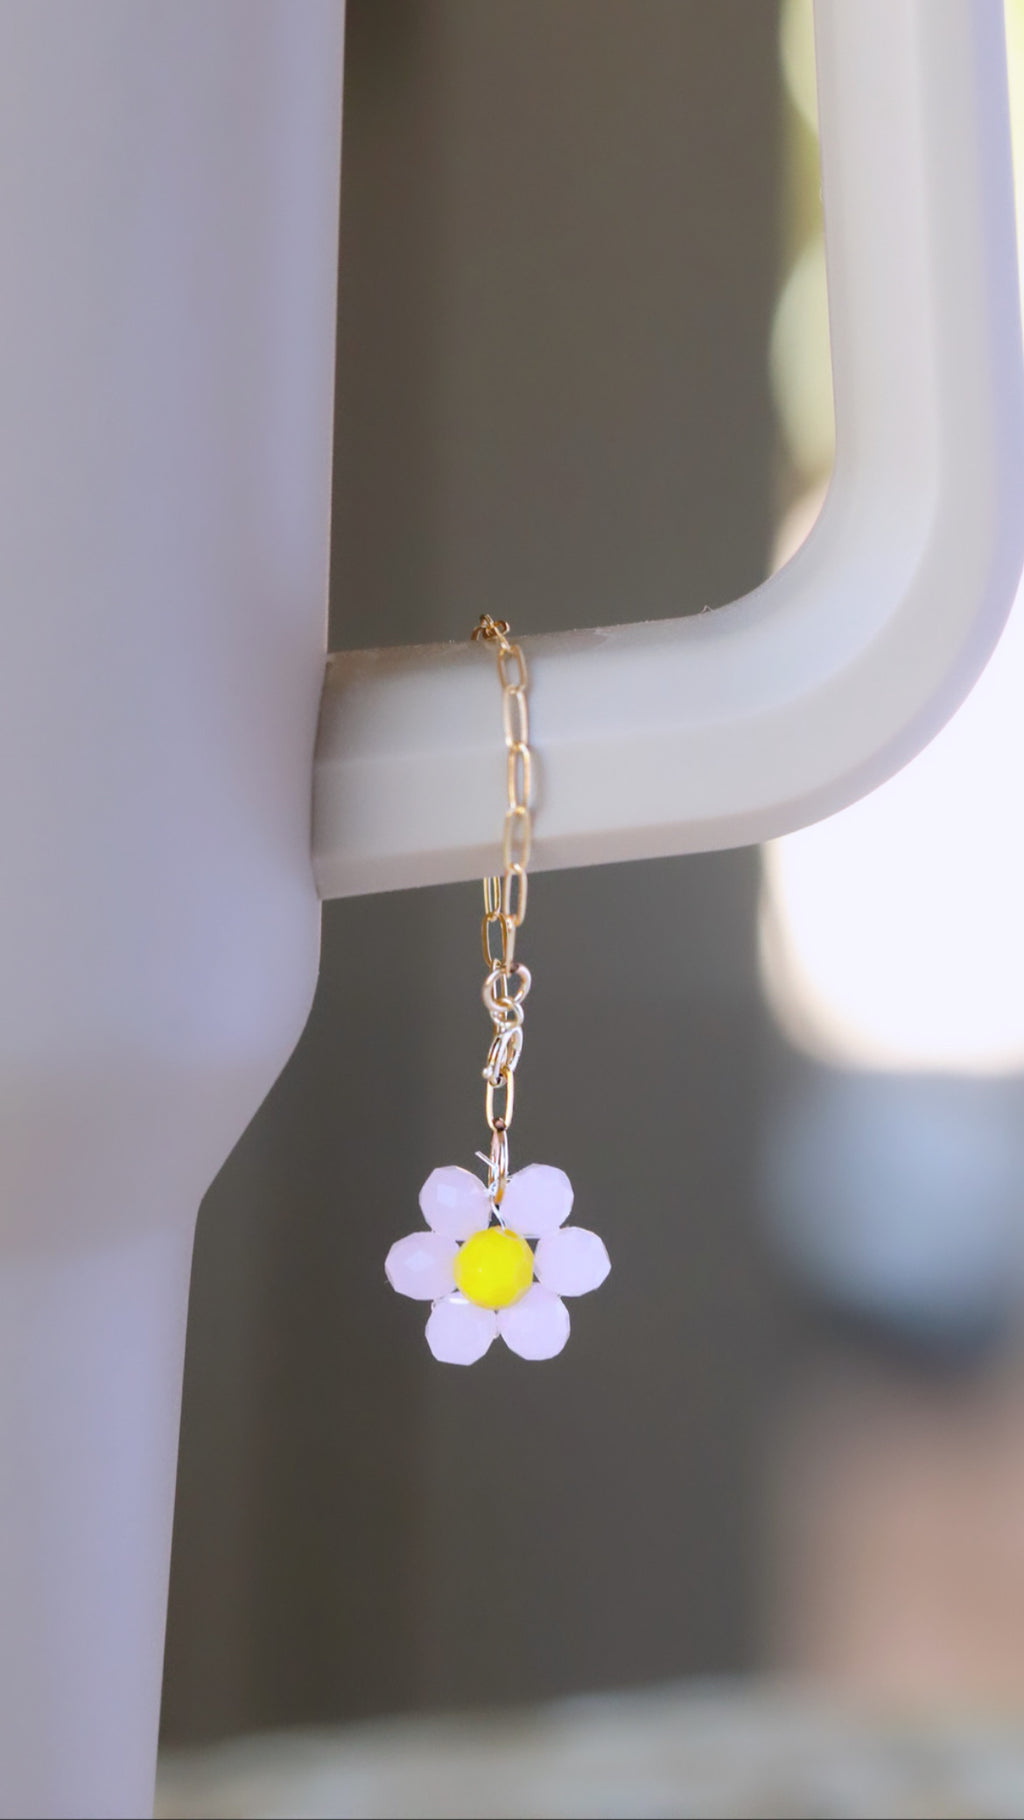 Daisy Stanley Cup Charm